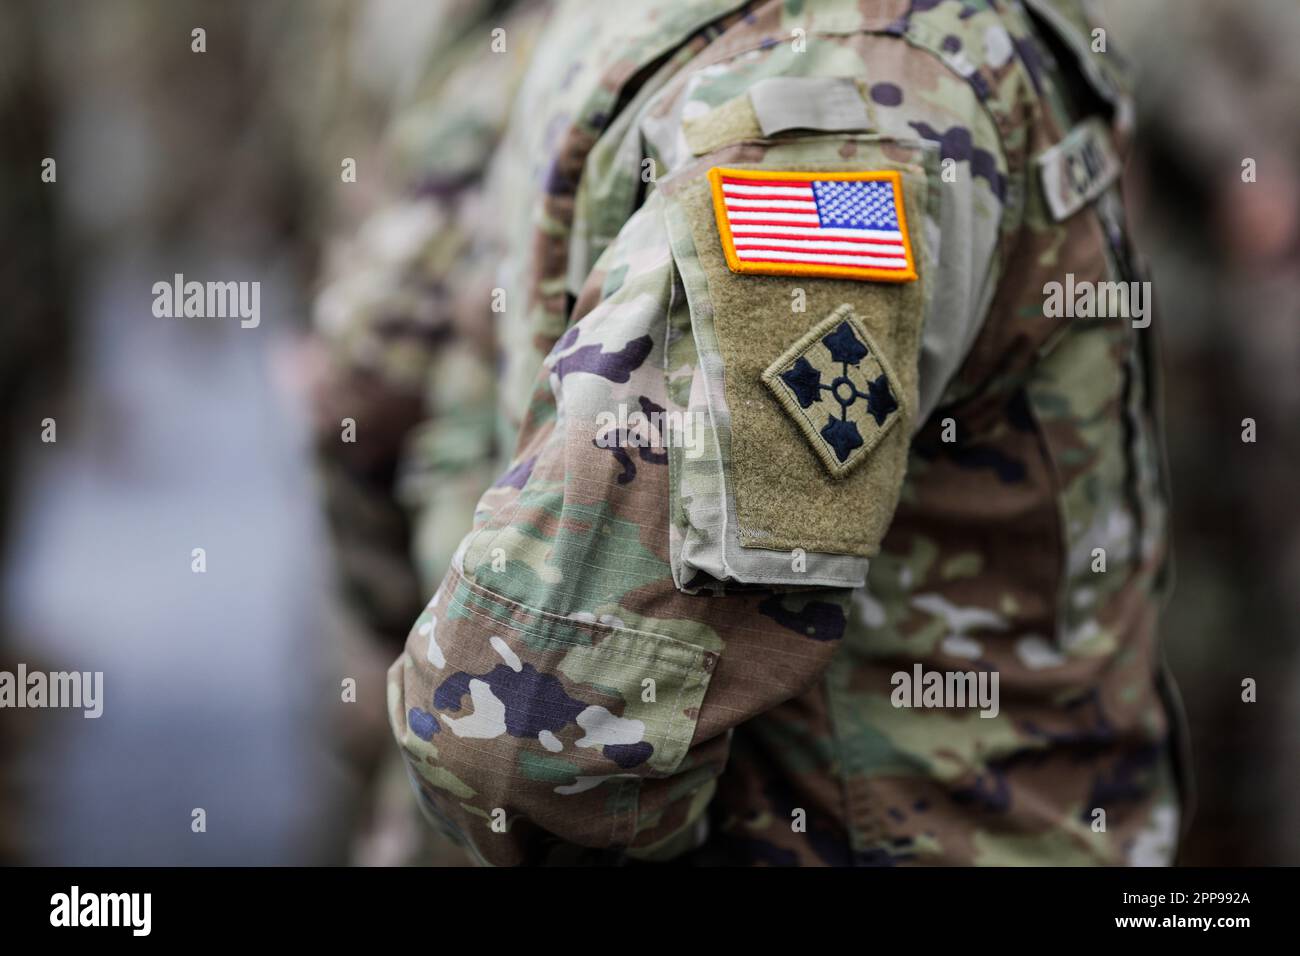 Bucharest, Romania - April 5, 2023: Servicemen of the 10th Mountain Division and of the 101st Airborne Division (Air Assault), both of the US Army, at Stock Photo